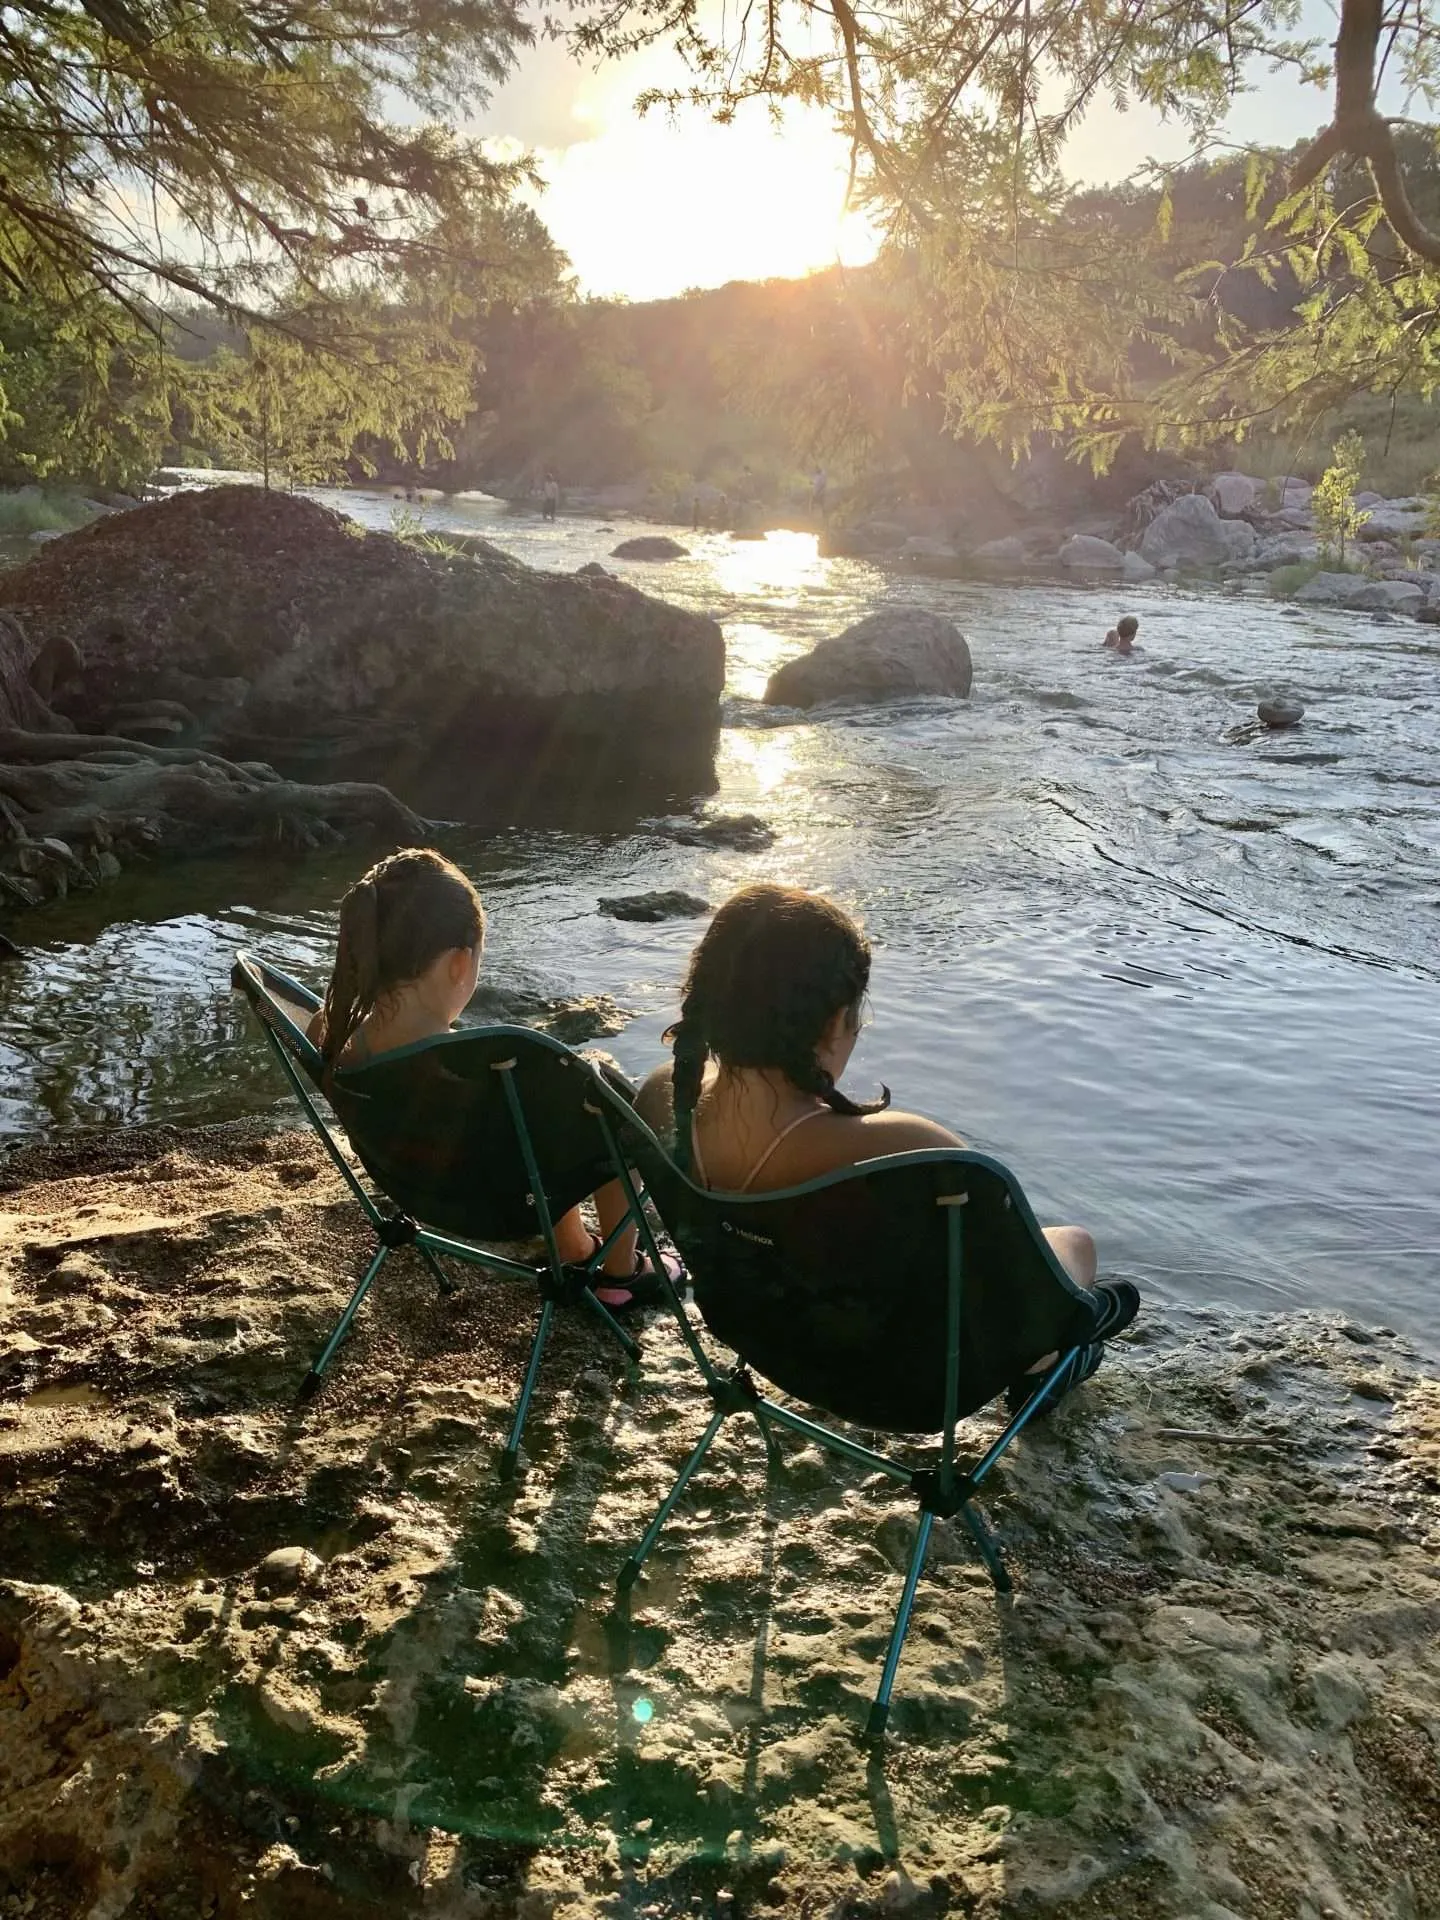 Sitting along the bank of the Pedernales River.